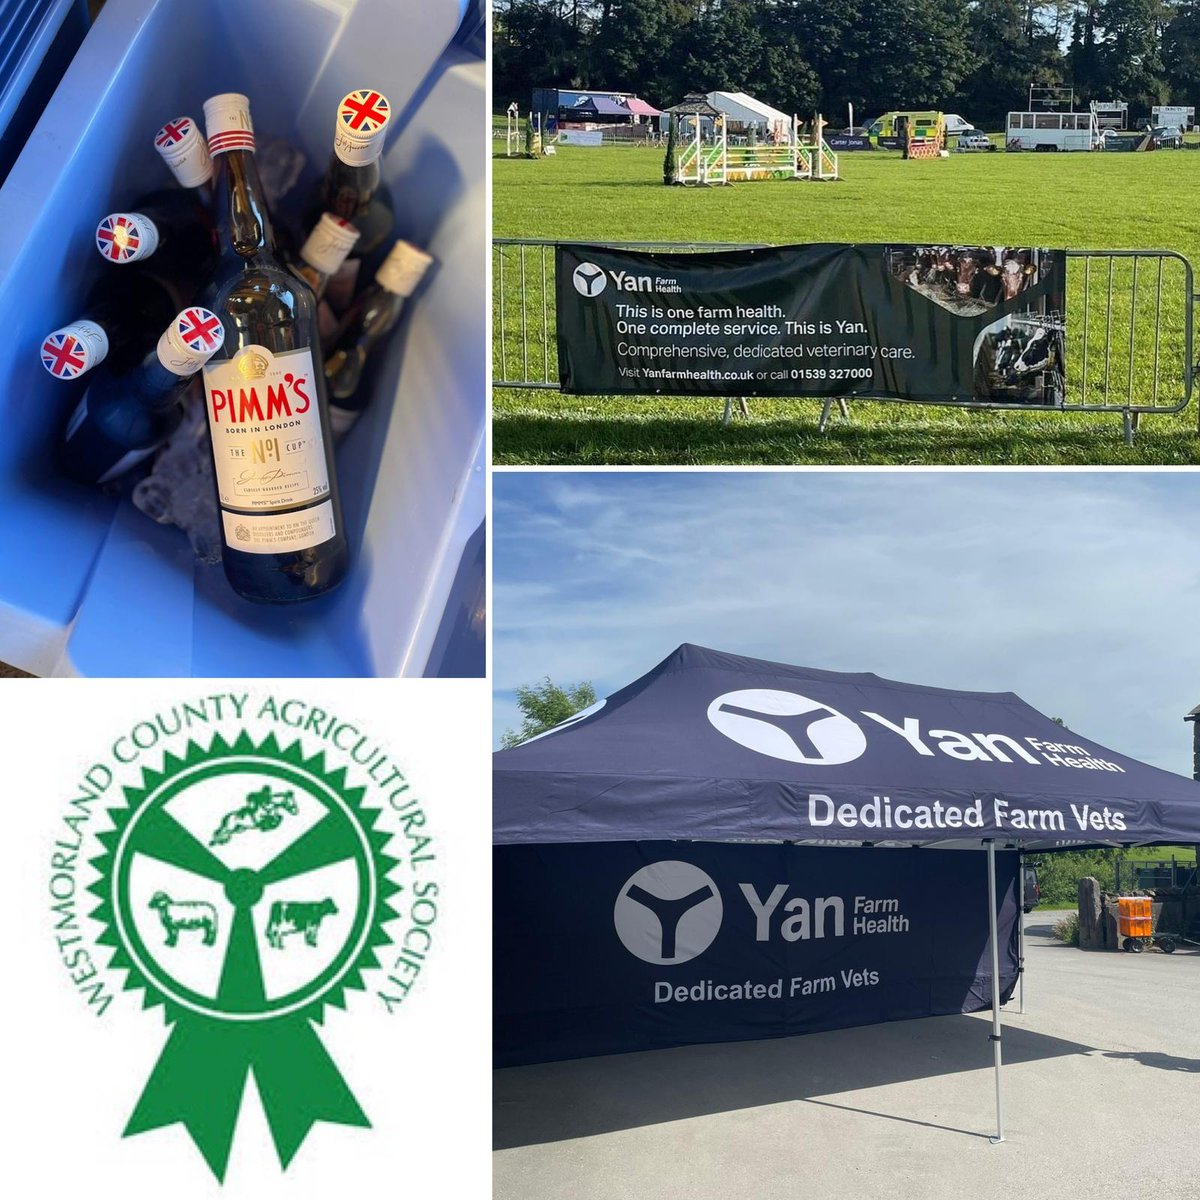 One week to go until the first day @WcaShow show! 🐄🐏
We look forward to catching up with many of you there!
Join us for a drink (or two) and enter our prize draw to be in with a chance of winning a hamper of goodies! 🍻
#independentvets #showtime #showsponsor #farmvets #xlvets